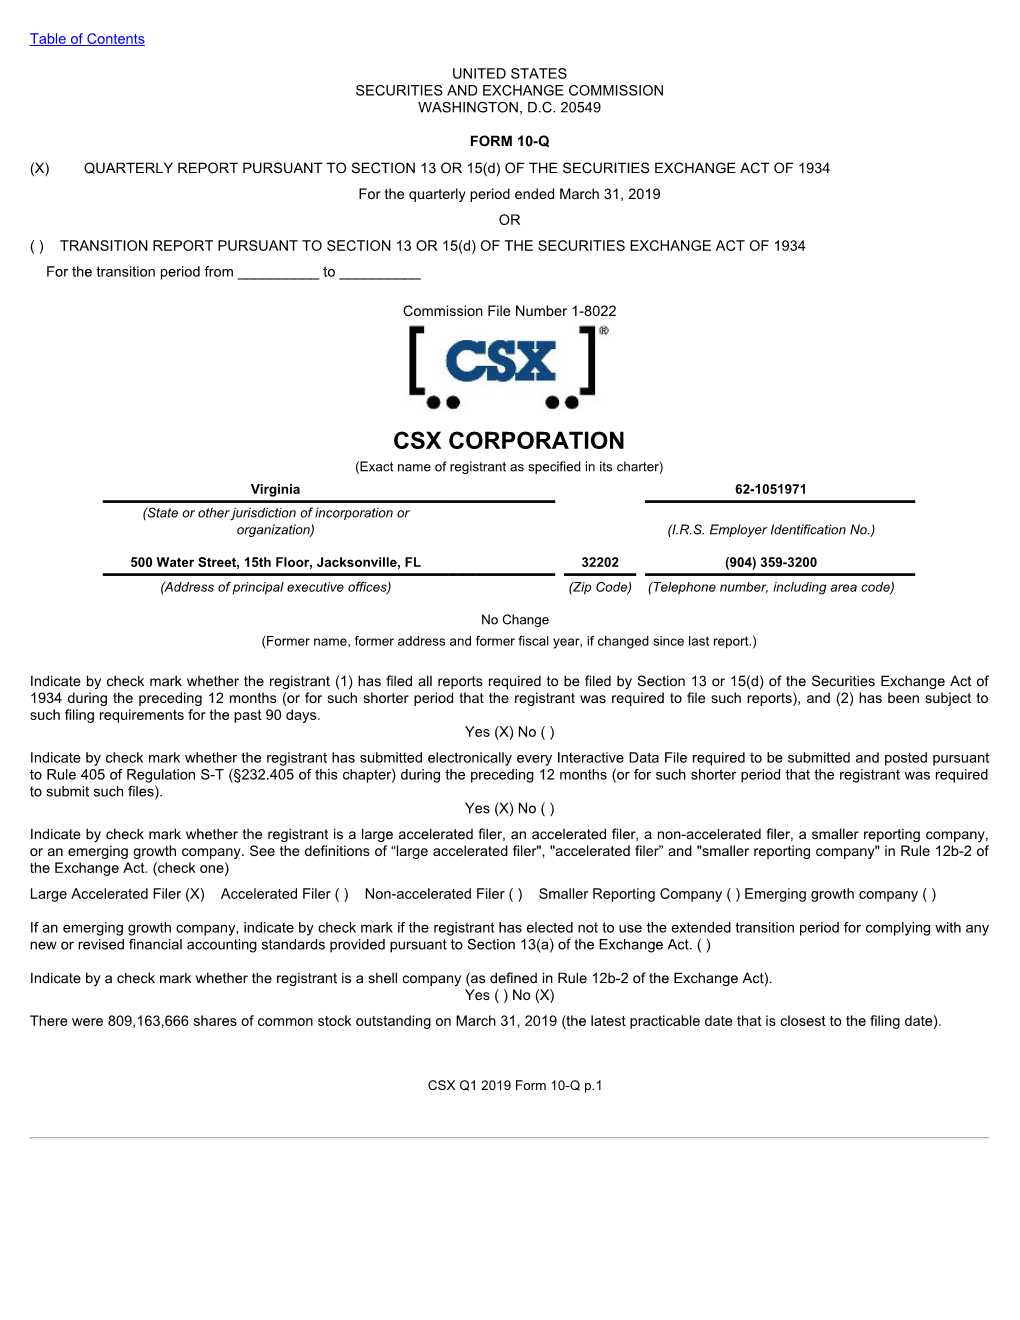 CSX CORPORATION (Exact Name of Registrant As Specified in Its Charter) Virginia 62-1051971 (State Or Other Jurisdiction of Incorporation Or Organization) (I.R.S